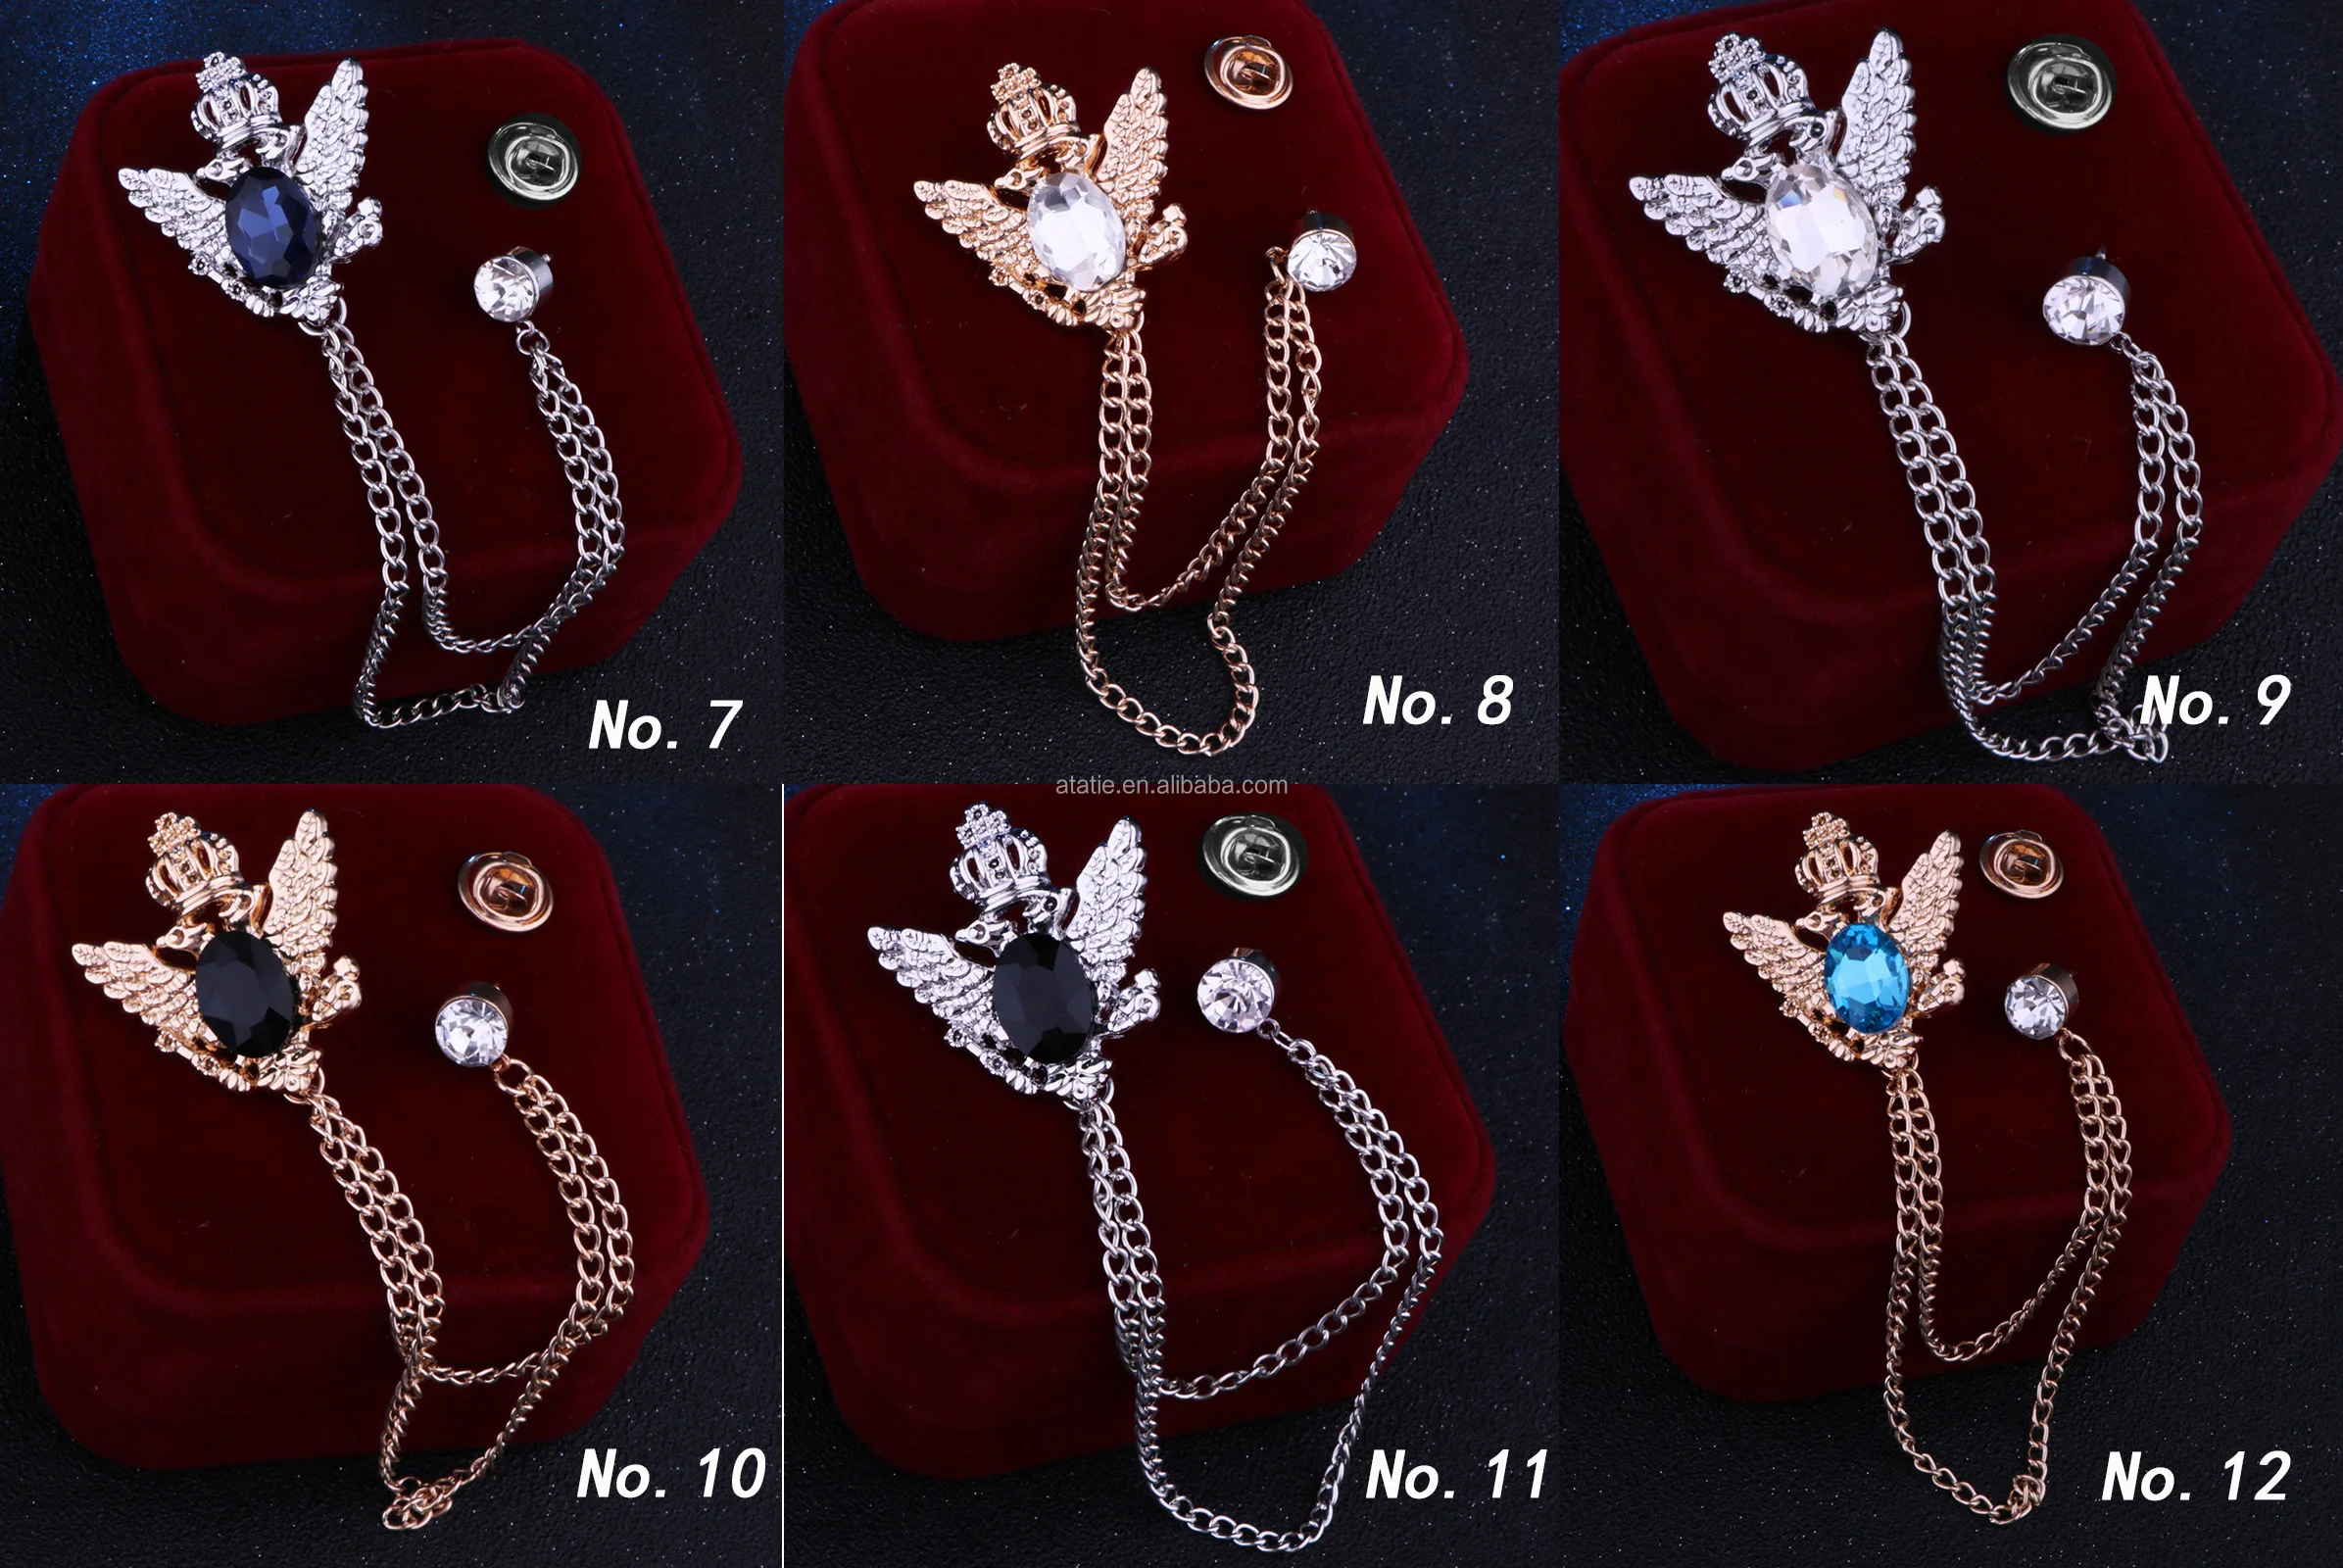 Pins, Brooches Bridegroom Rhinestone Chain Lapel Pin Badge Crystal Tassel  Brooch Suit Jewelry Luxury Men Accessories From Bocche, $6.44